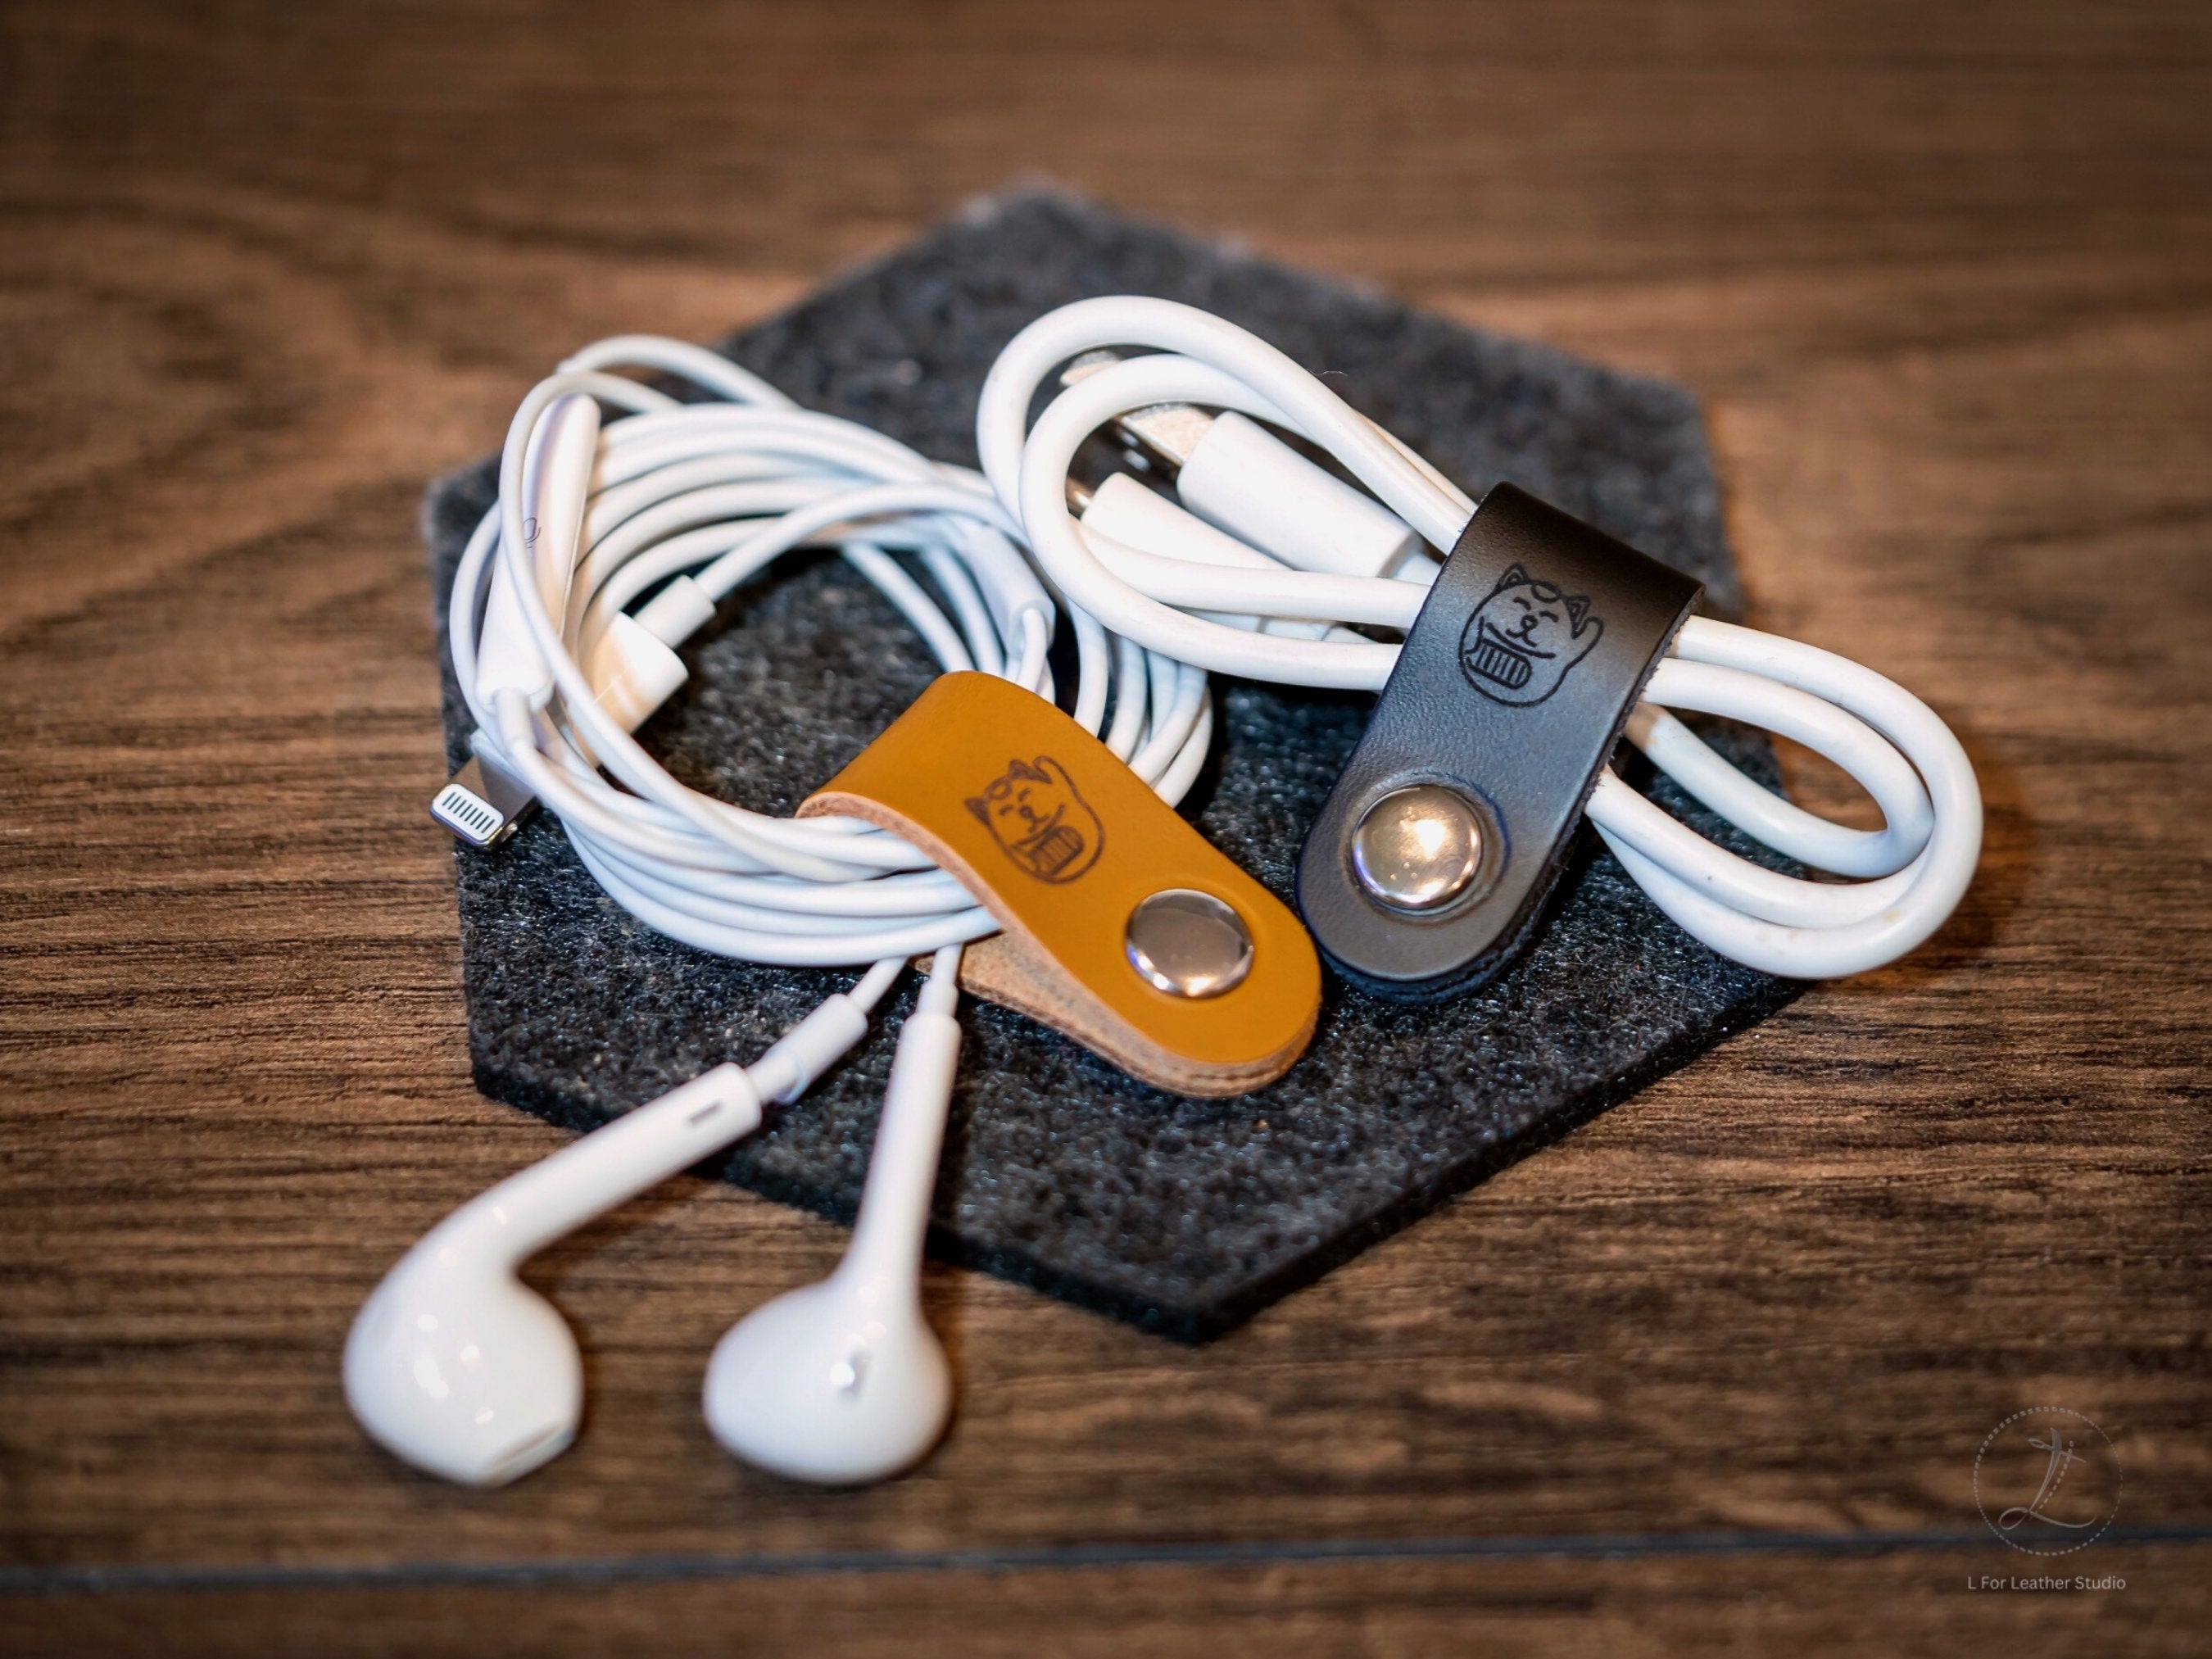 https://www.sarapnow.com/cdn/shop/files/l-for-leather-studio-home-lifestyle-teeny-fortune-cat-cord-wrap-personalized-cord-organizer-minimalistic-birthday-anniversary-gift-edc-for-him-her-vintage-cowhide-holder-3045453781410.jpg?v=1687364172&width=2700